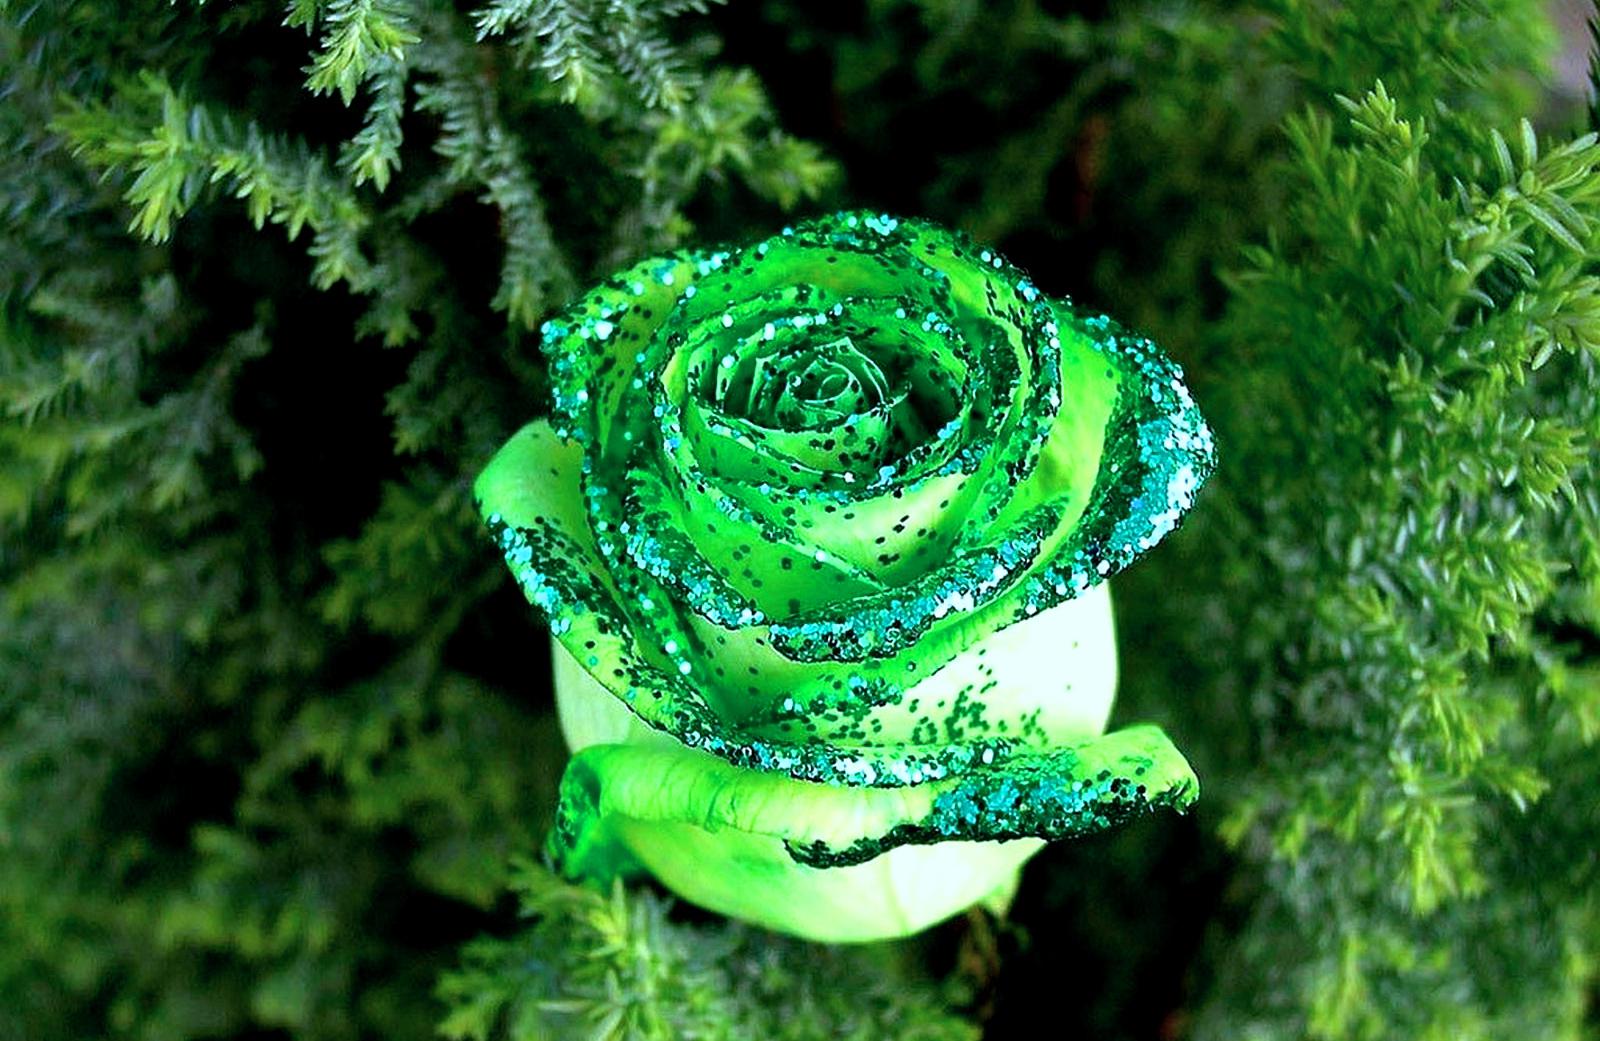 Green Roses Wallpapers